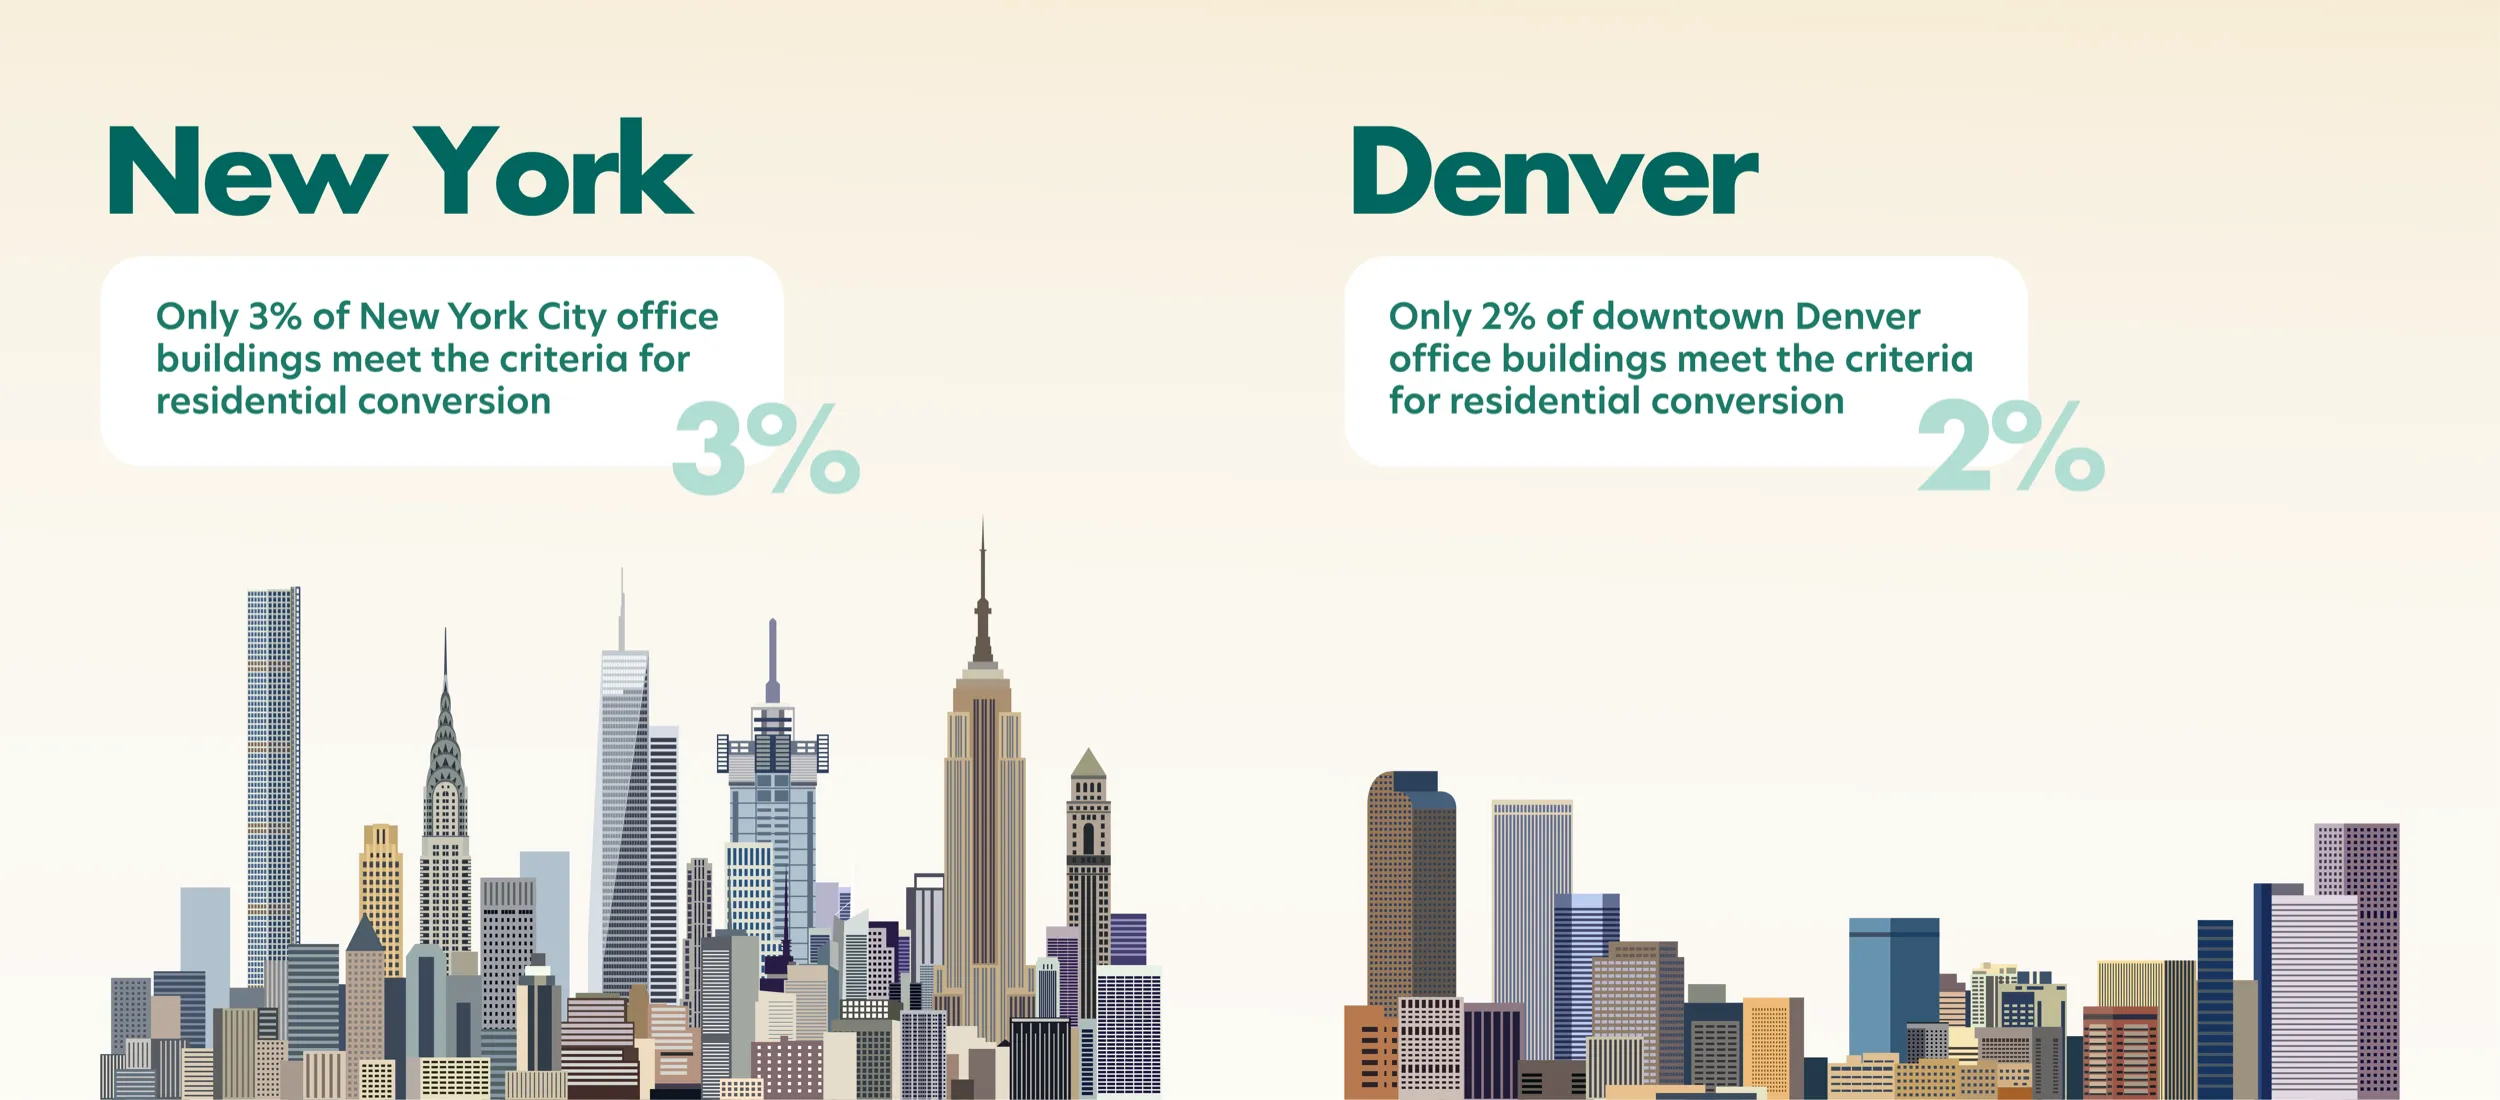 A comparative infographic showing the percentage of office buildings in New York and Denver that meet the criteria for residential conversion, with 3% in New York and 2% in Denver.